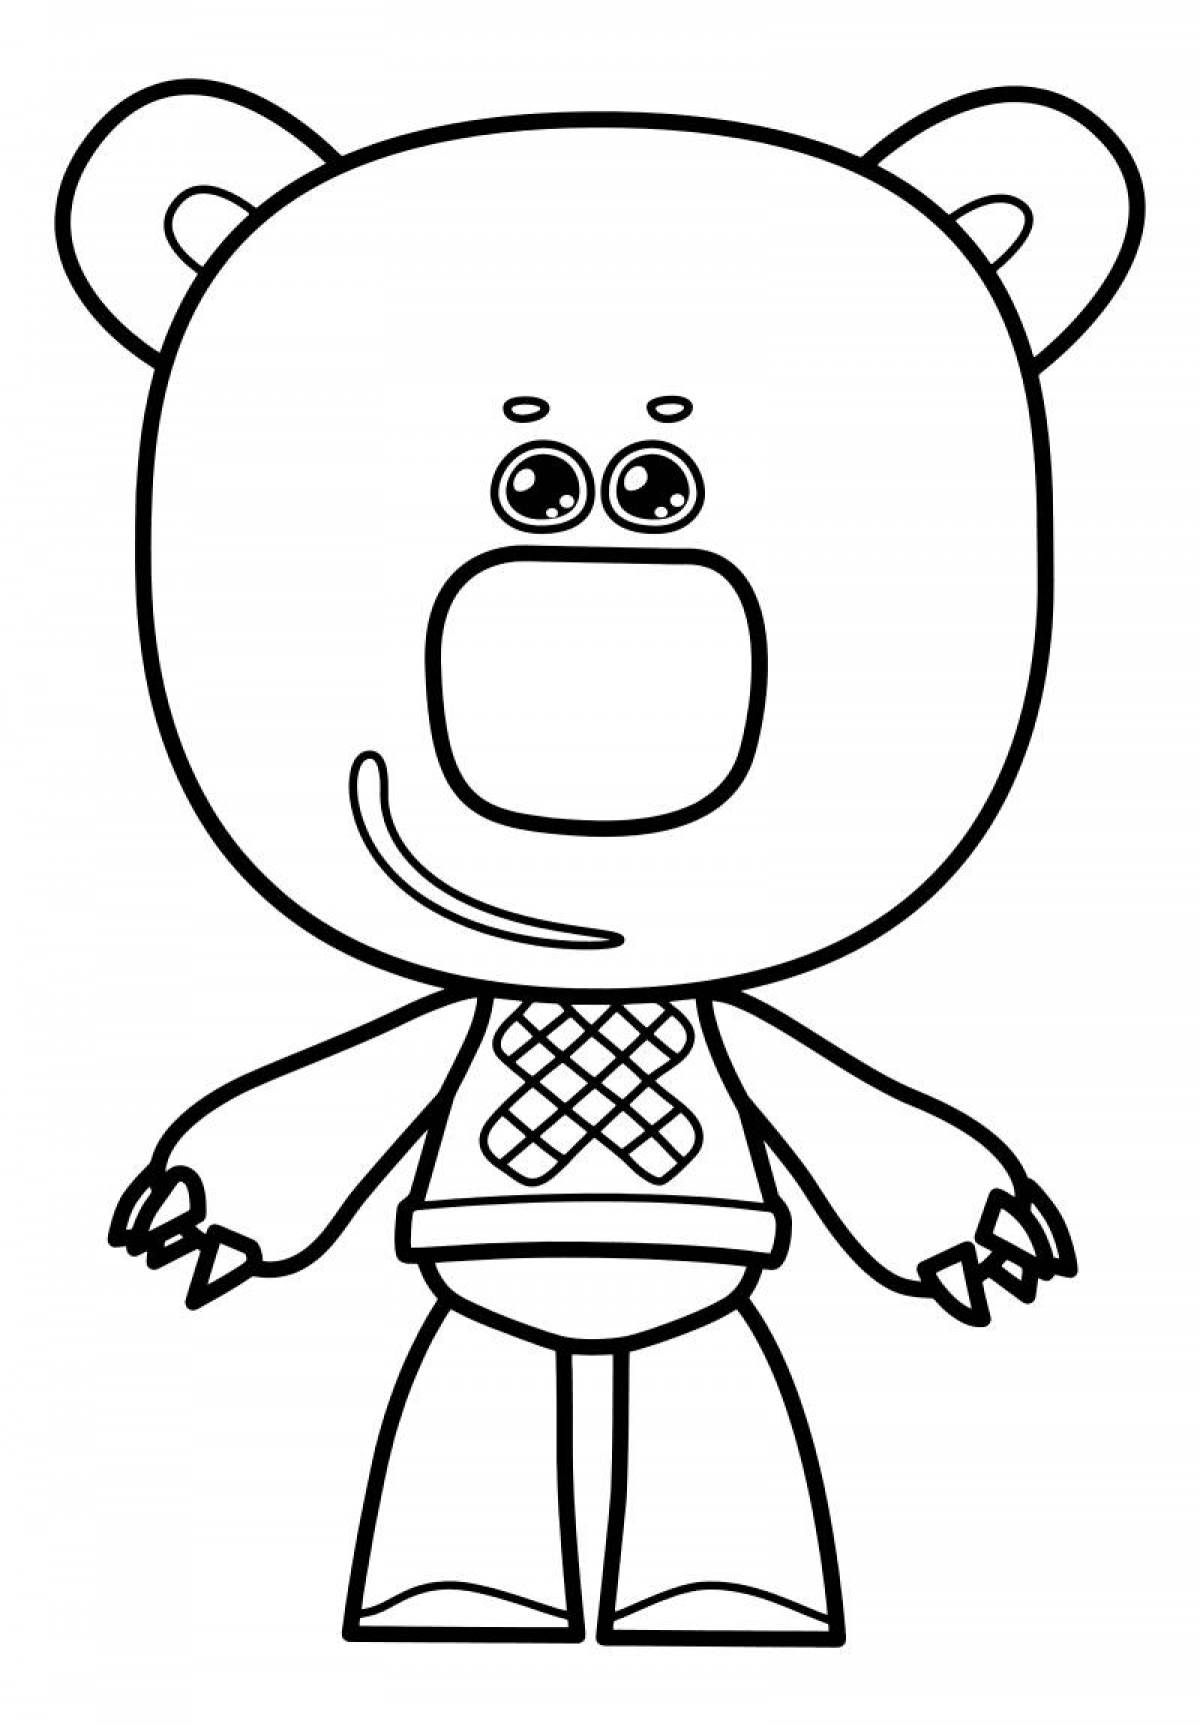 Turn on the cute bear coloring #10